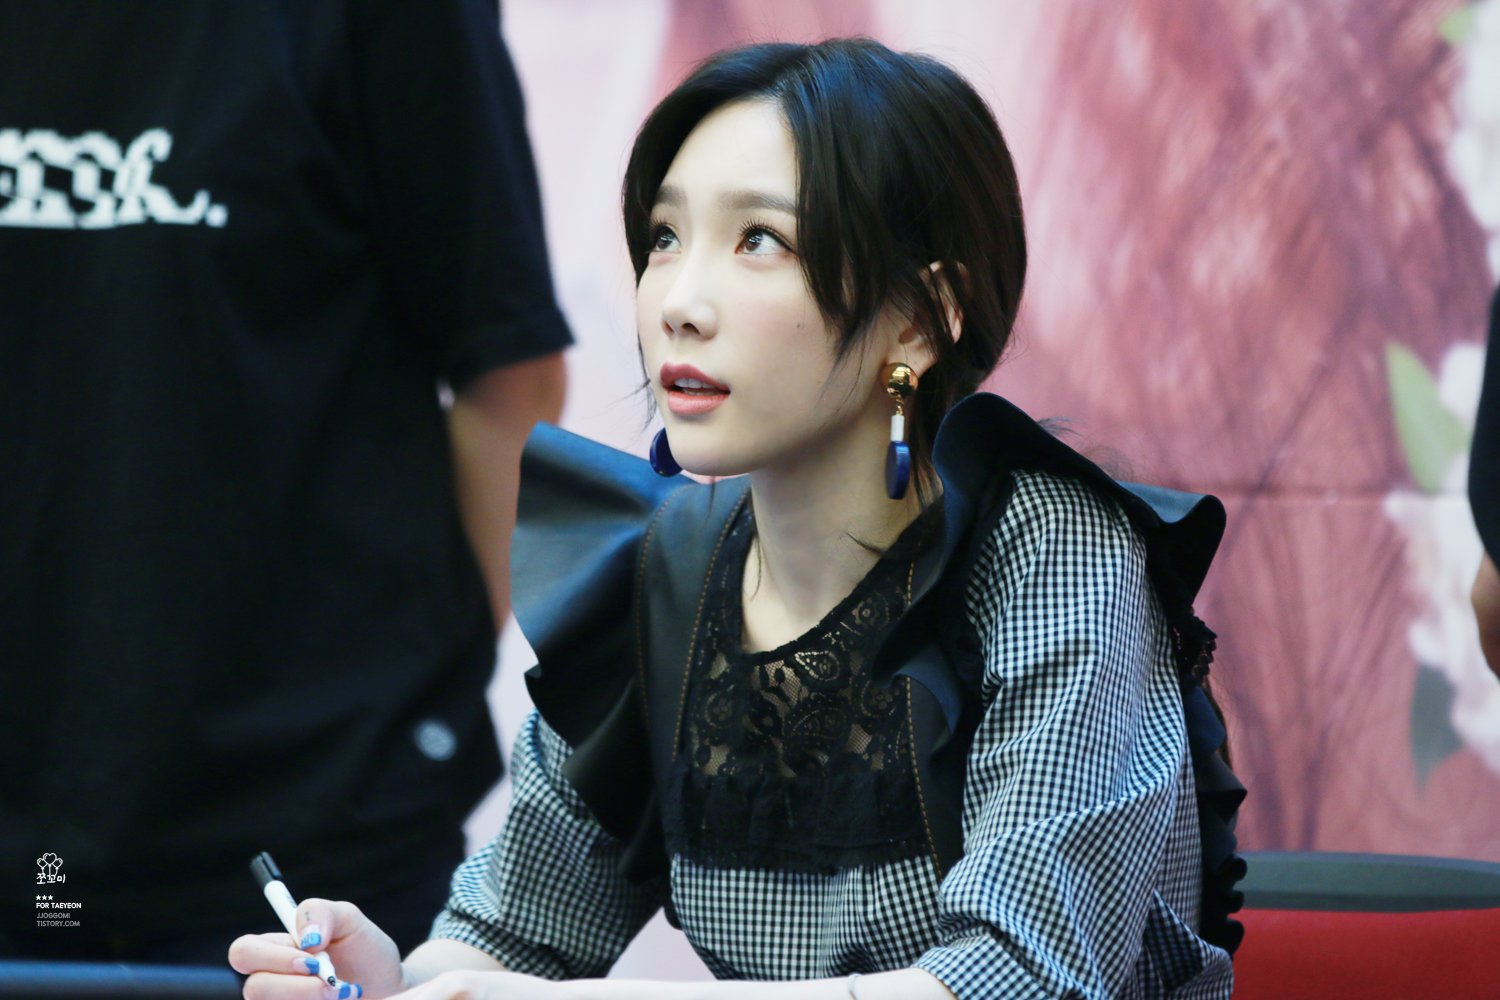 [PIC][16-04-2017]TaeYeon tham dự buổi Fansign cho “MY VOICE DELUXE EDITION” tại AK PLAZA vào chiều nay  - Page 3 9OE34S58sG-3000x3000